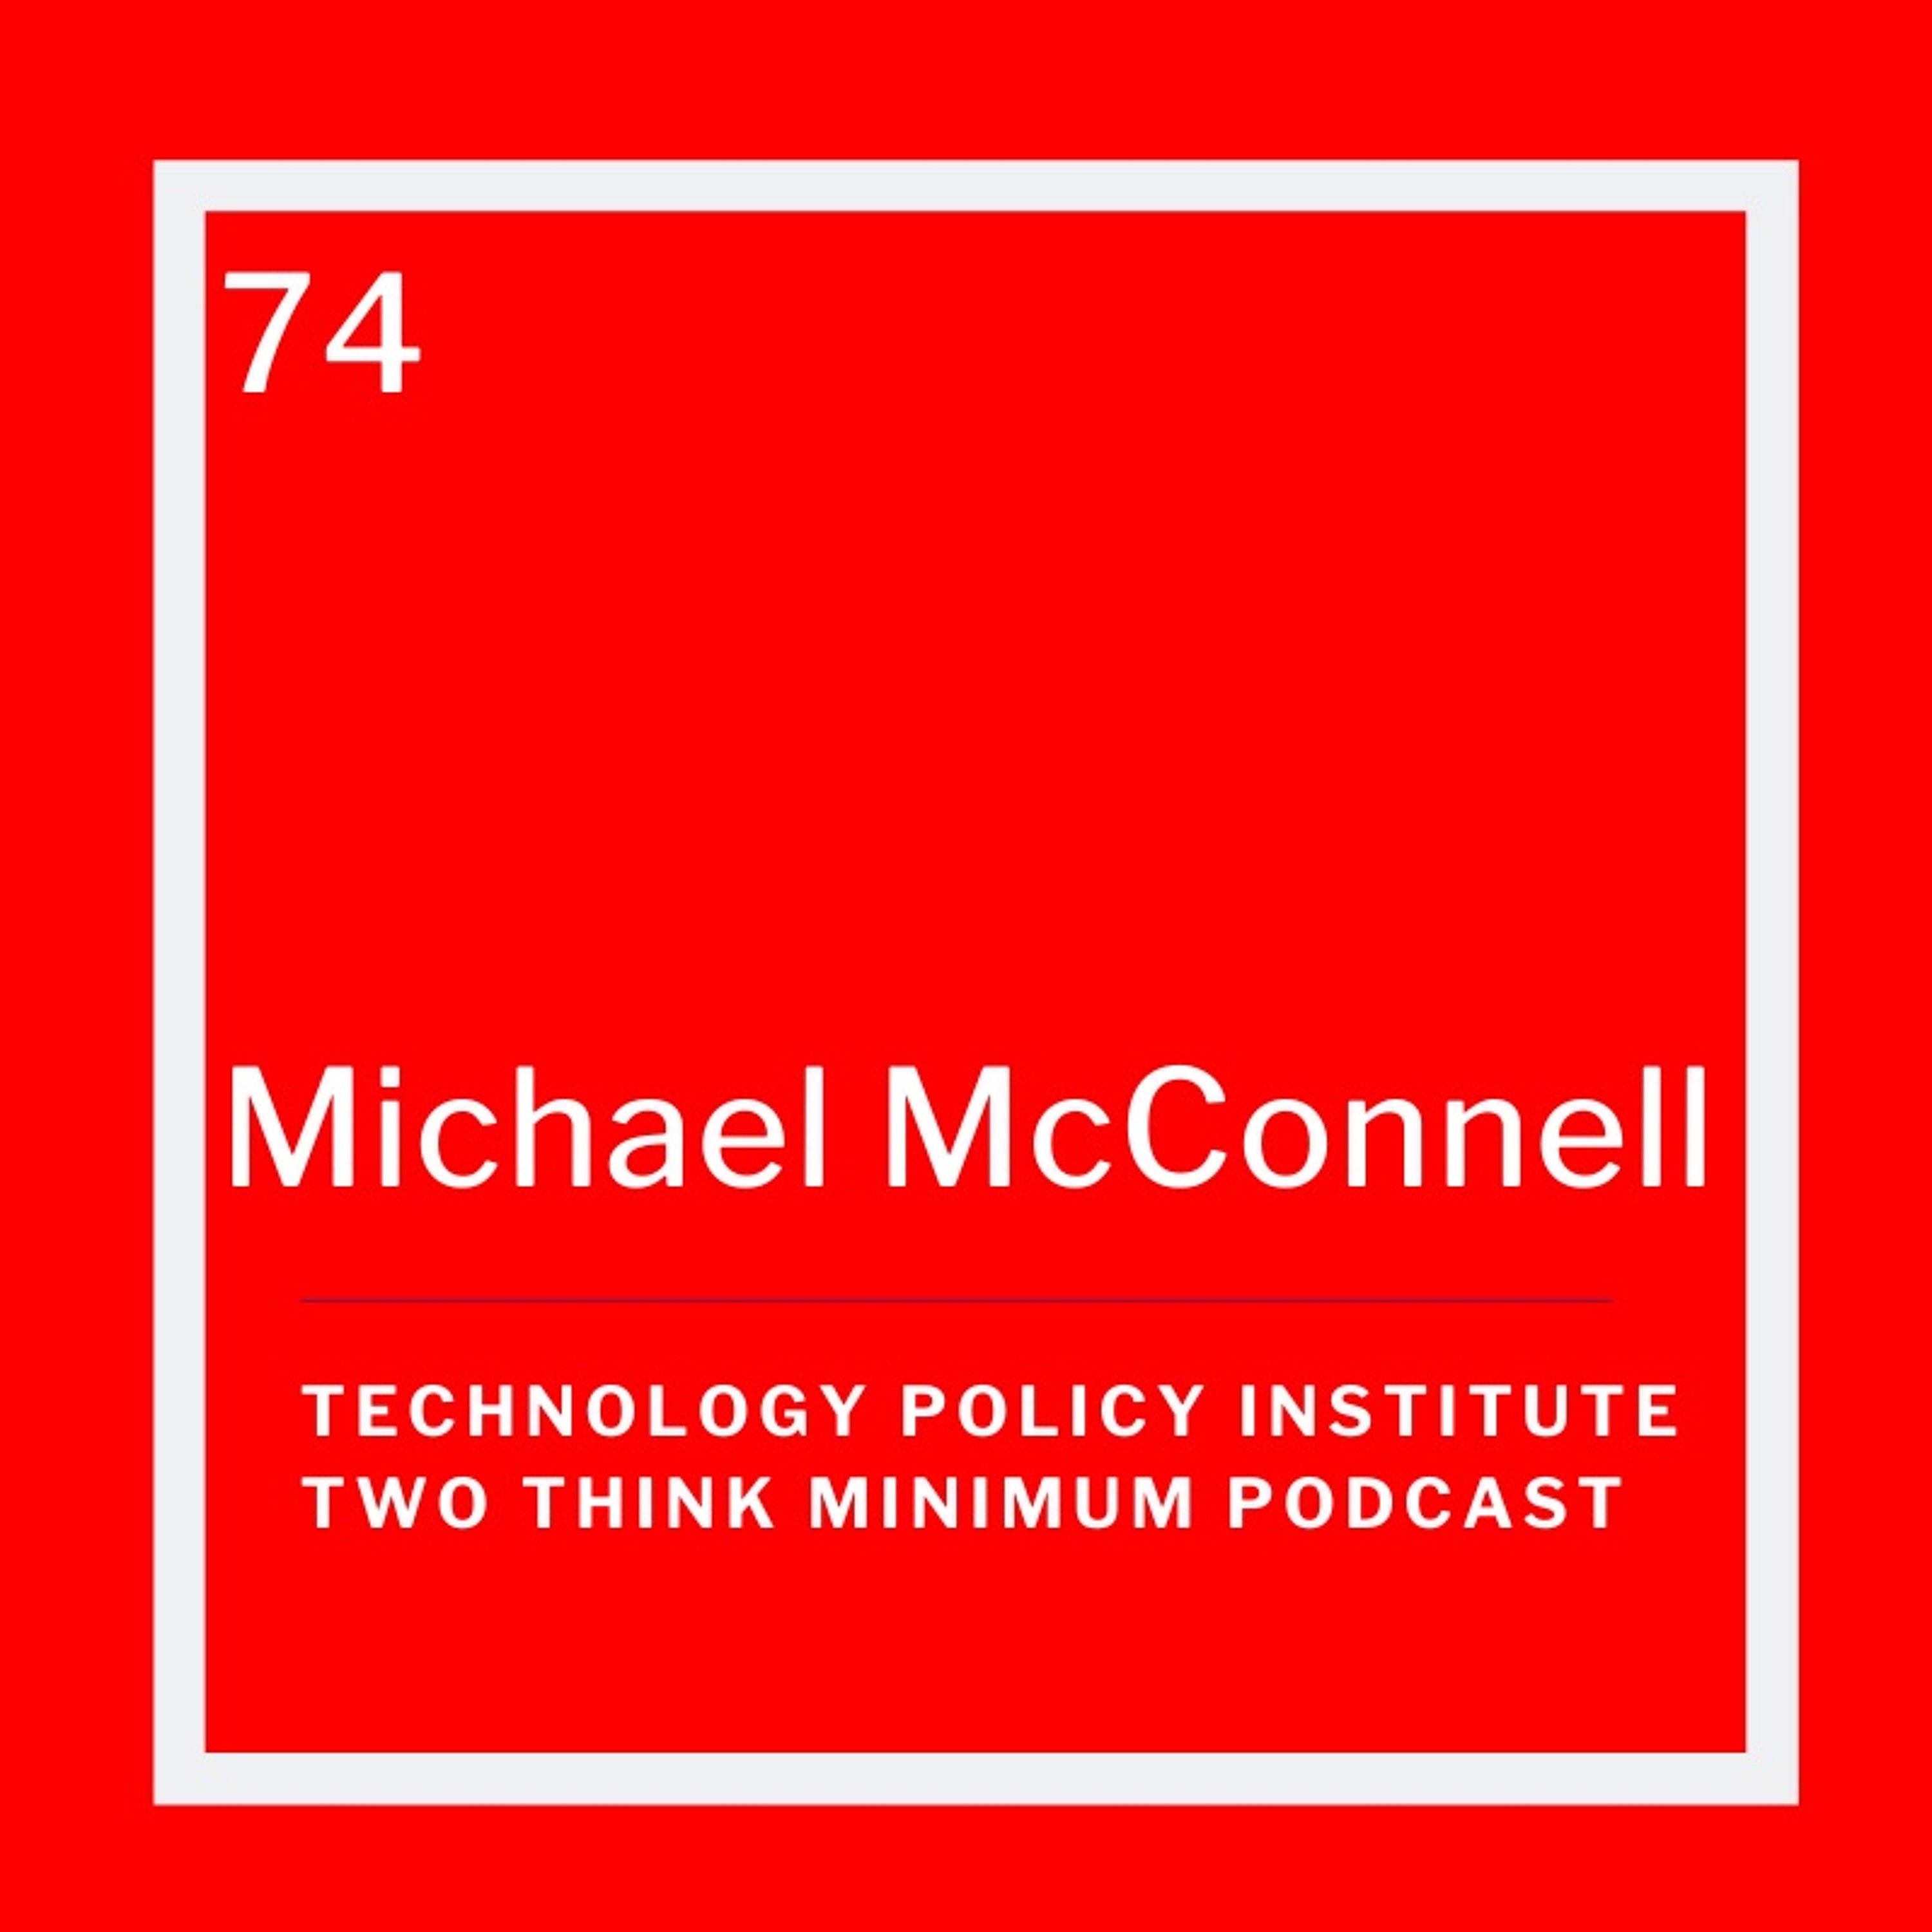 Michael McConnell on Facebook’s Oversight Board and Content Moderation